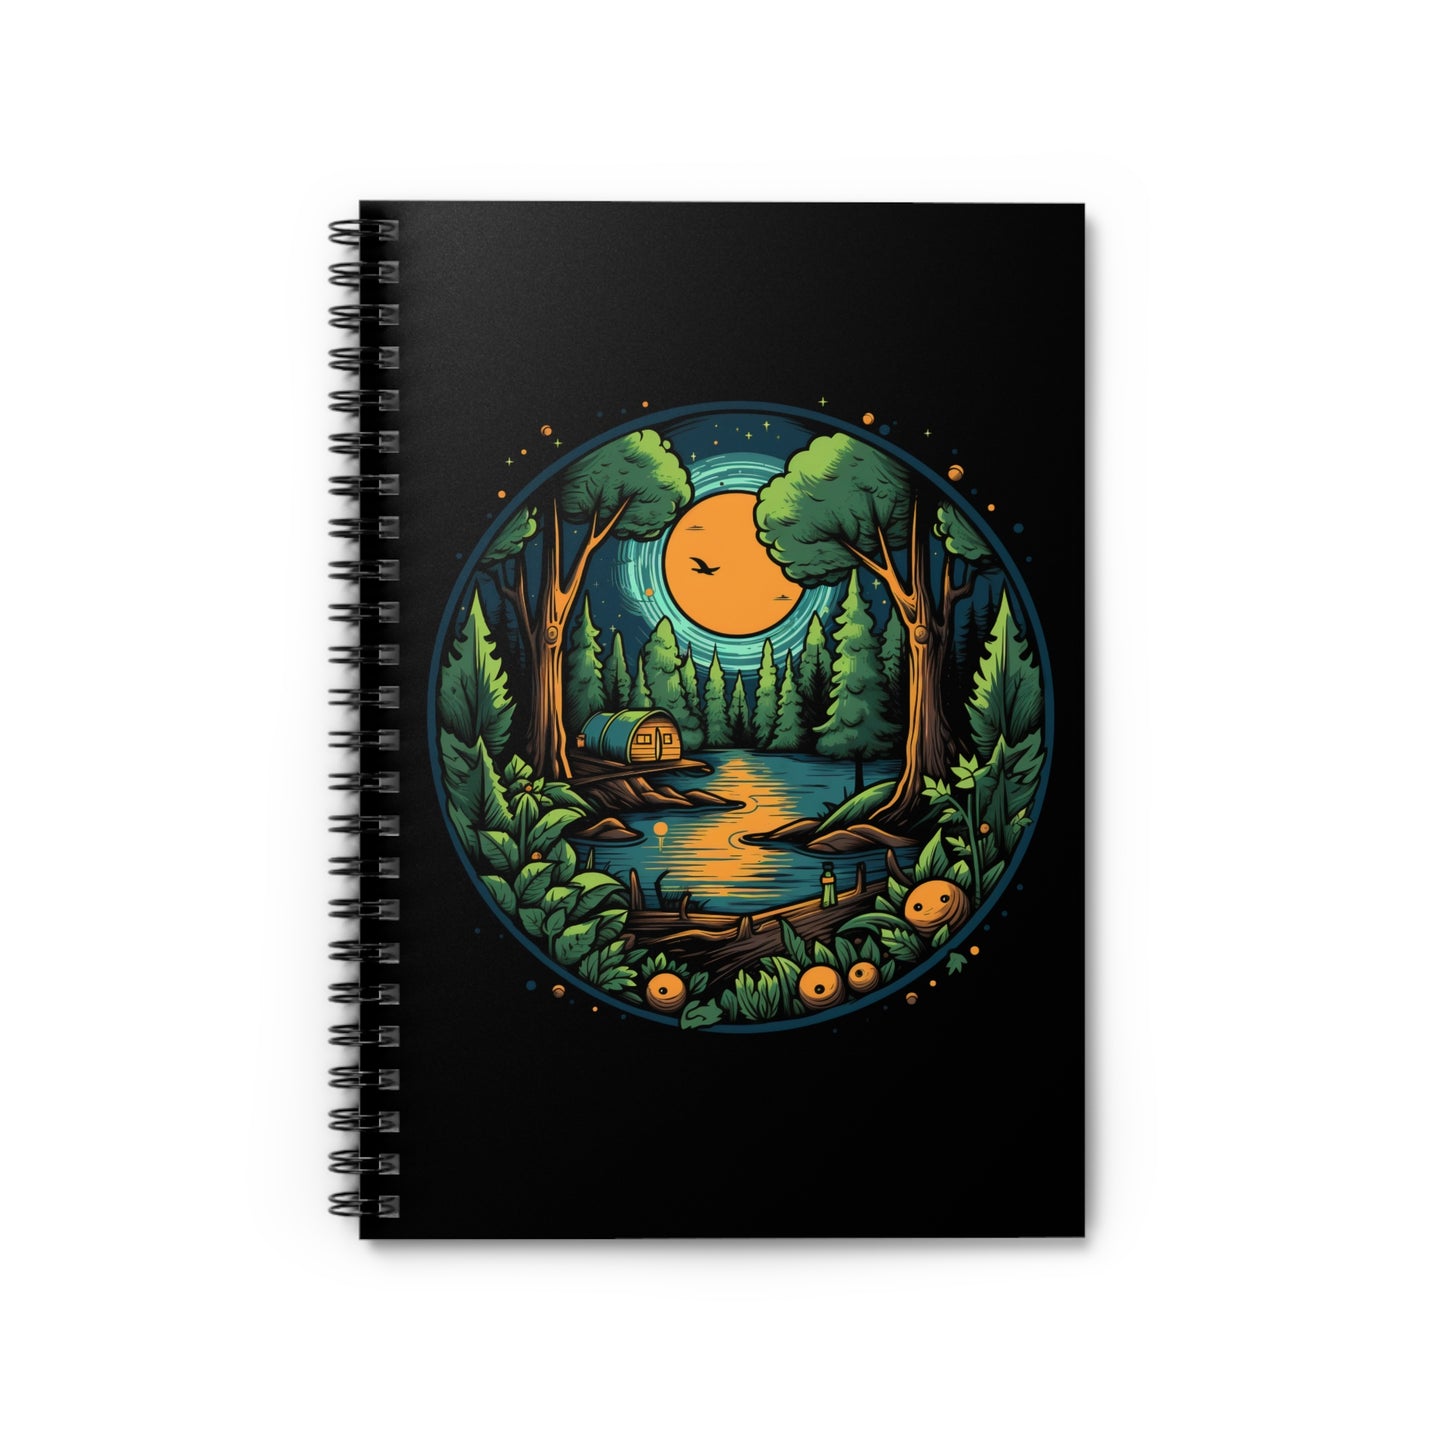 Camping Journal, Adventure Seekers Metal Spiral Notebook, Campfire Diary, Adventure Journal, Travel Notebook, Diary, Ruled Line